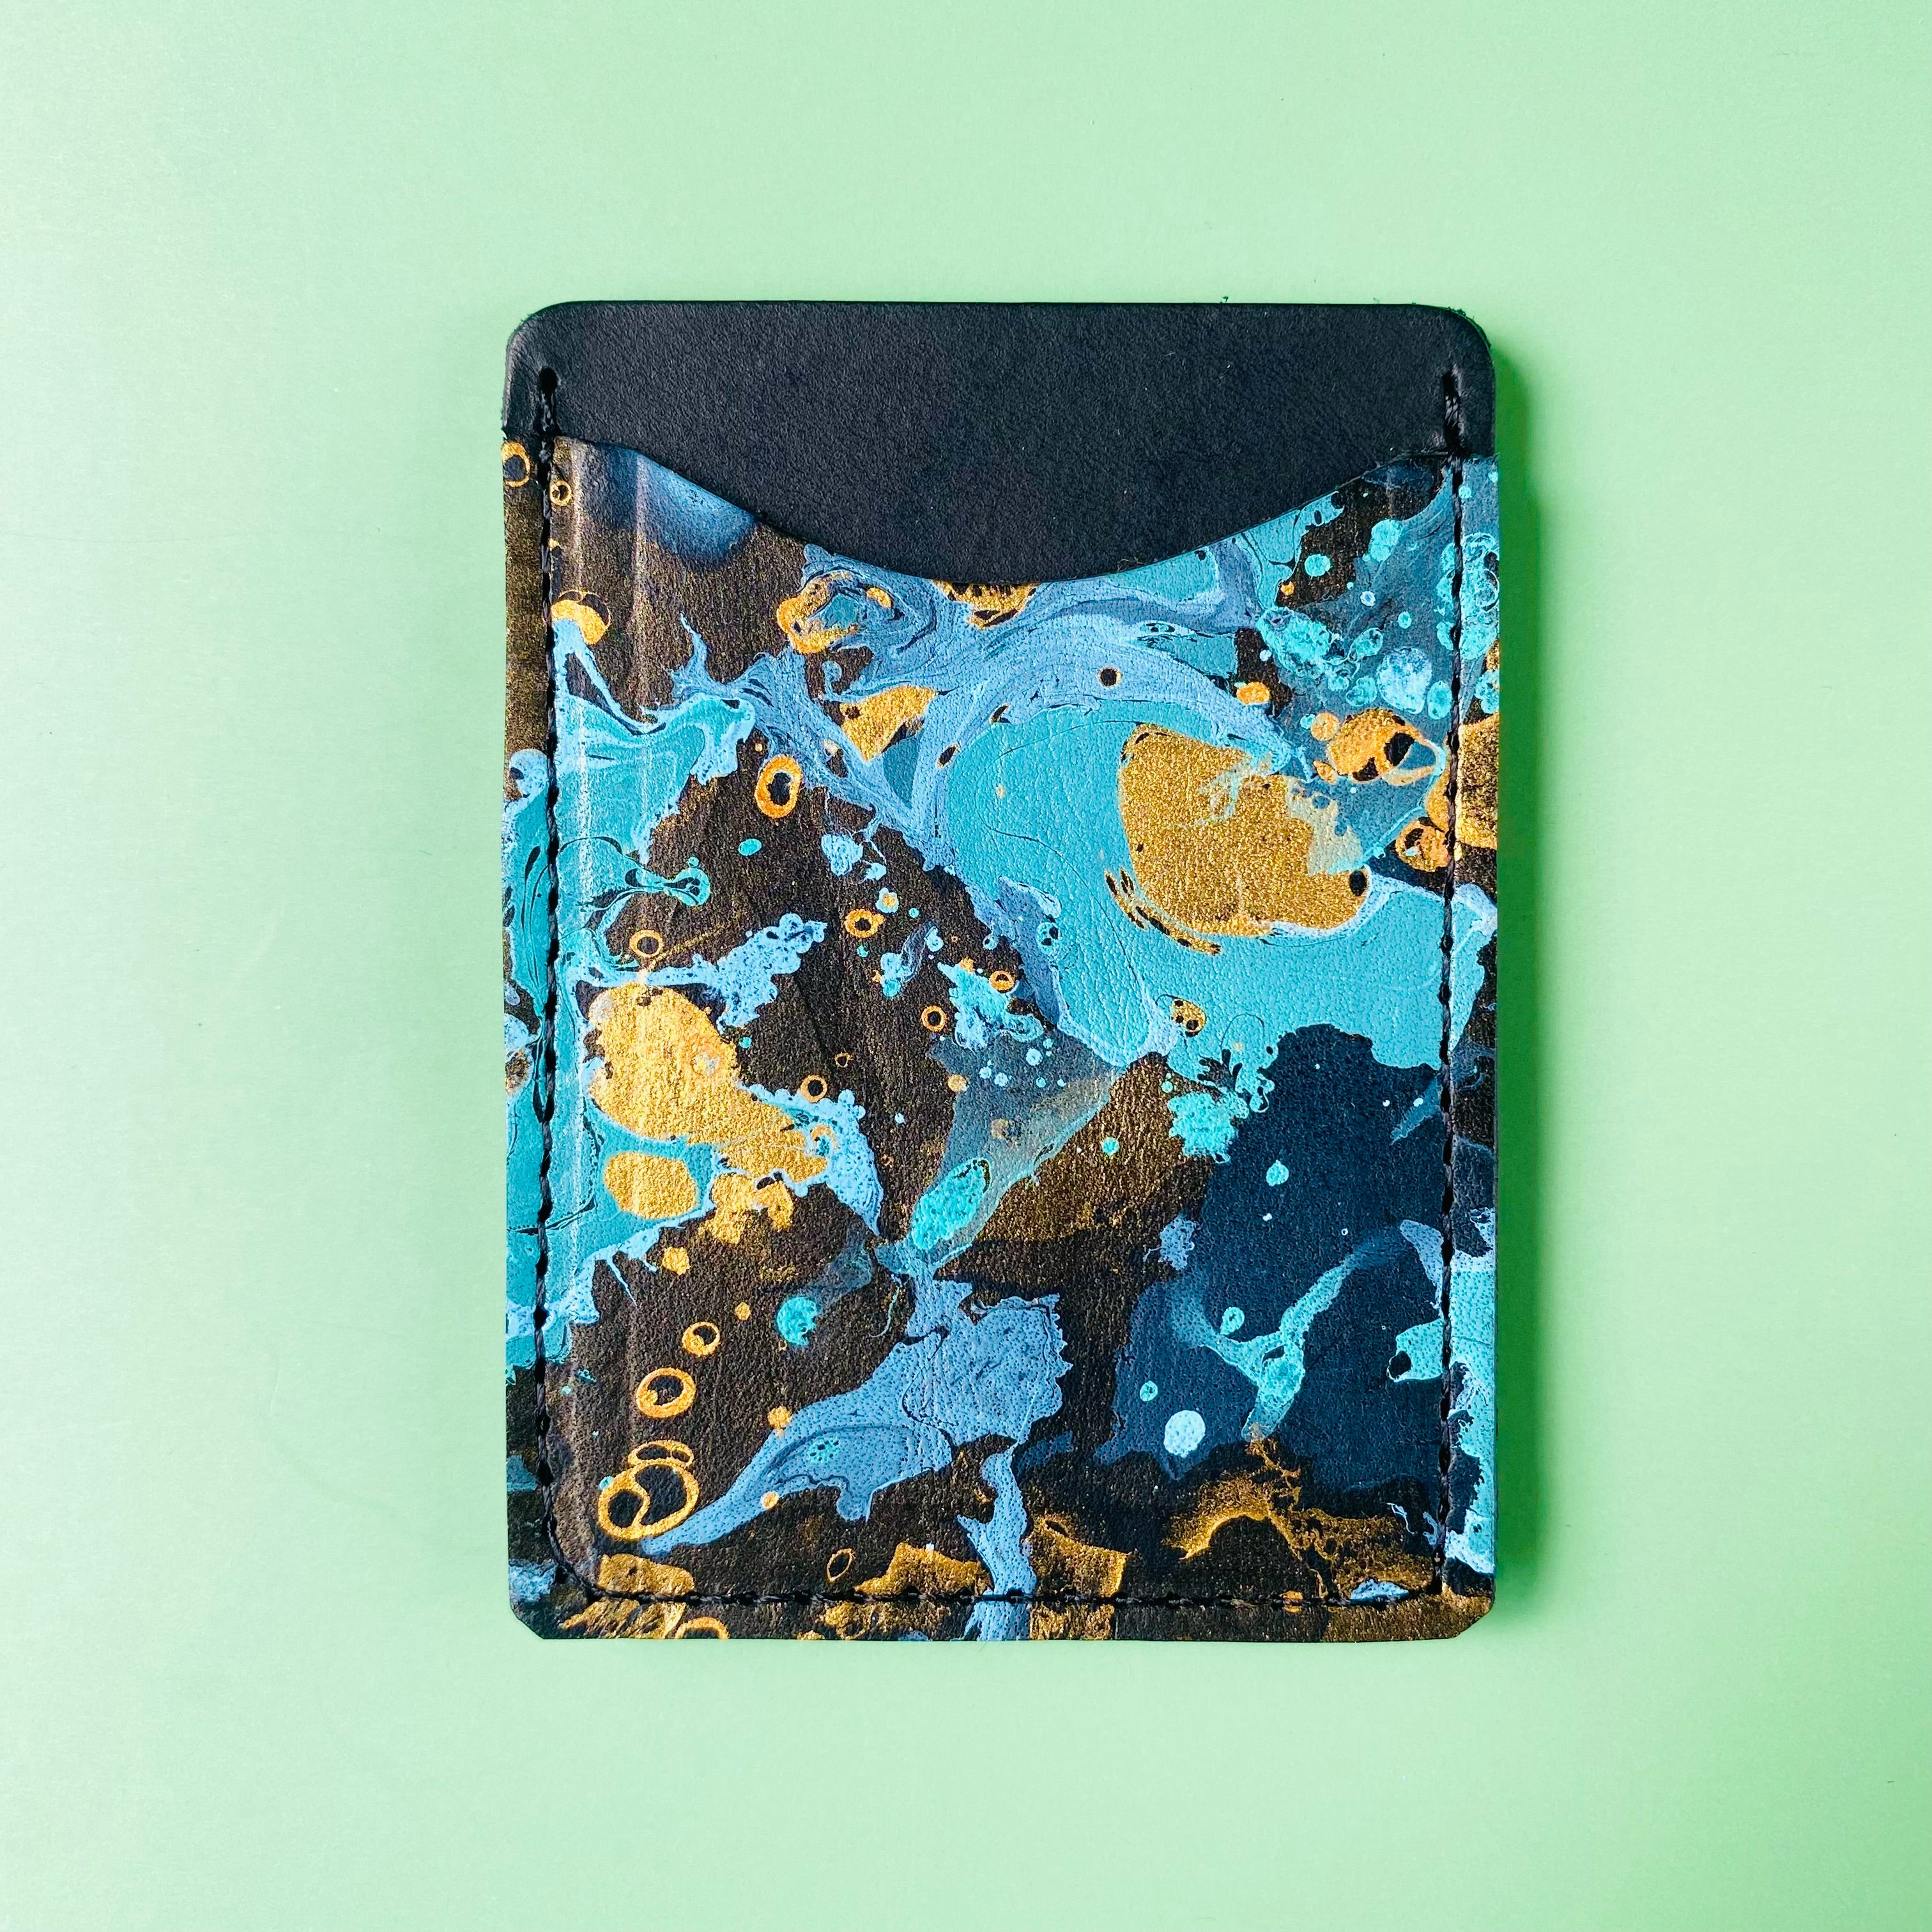 Leather Marbled Card Holder